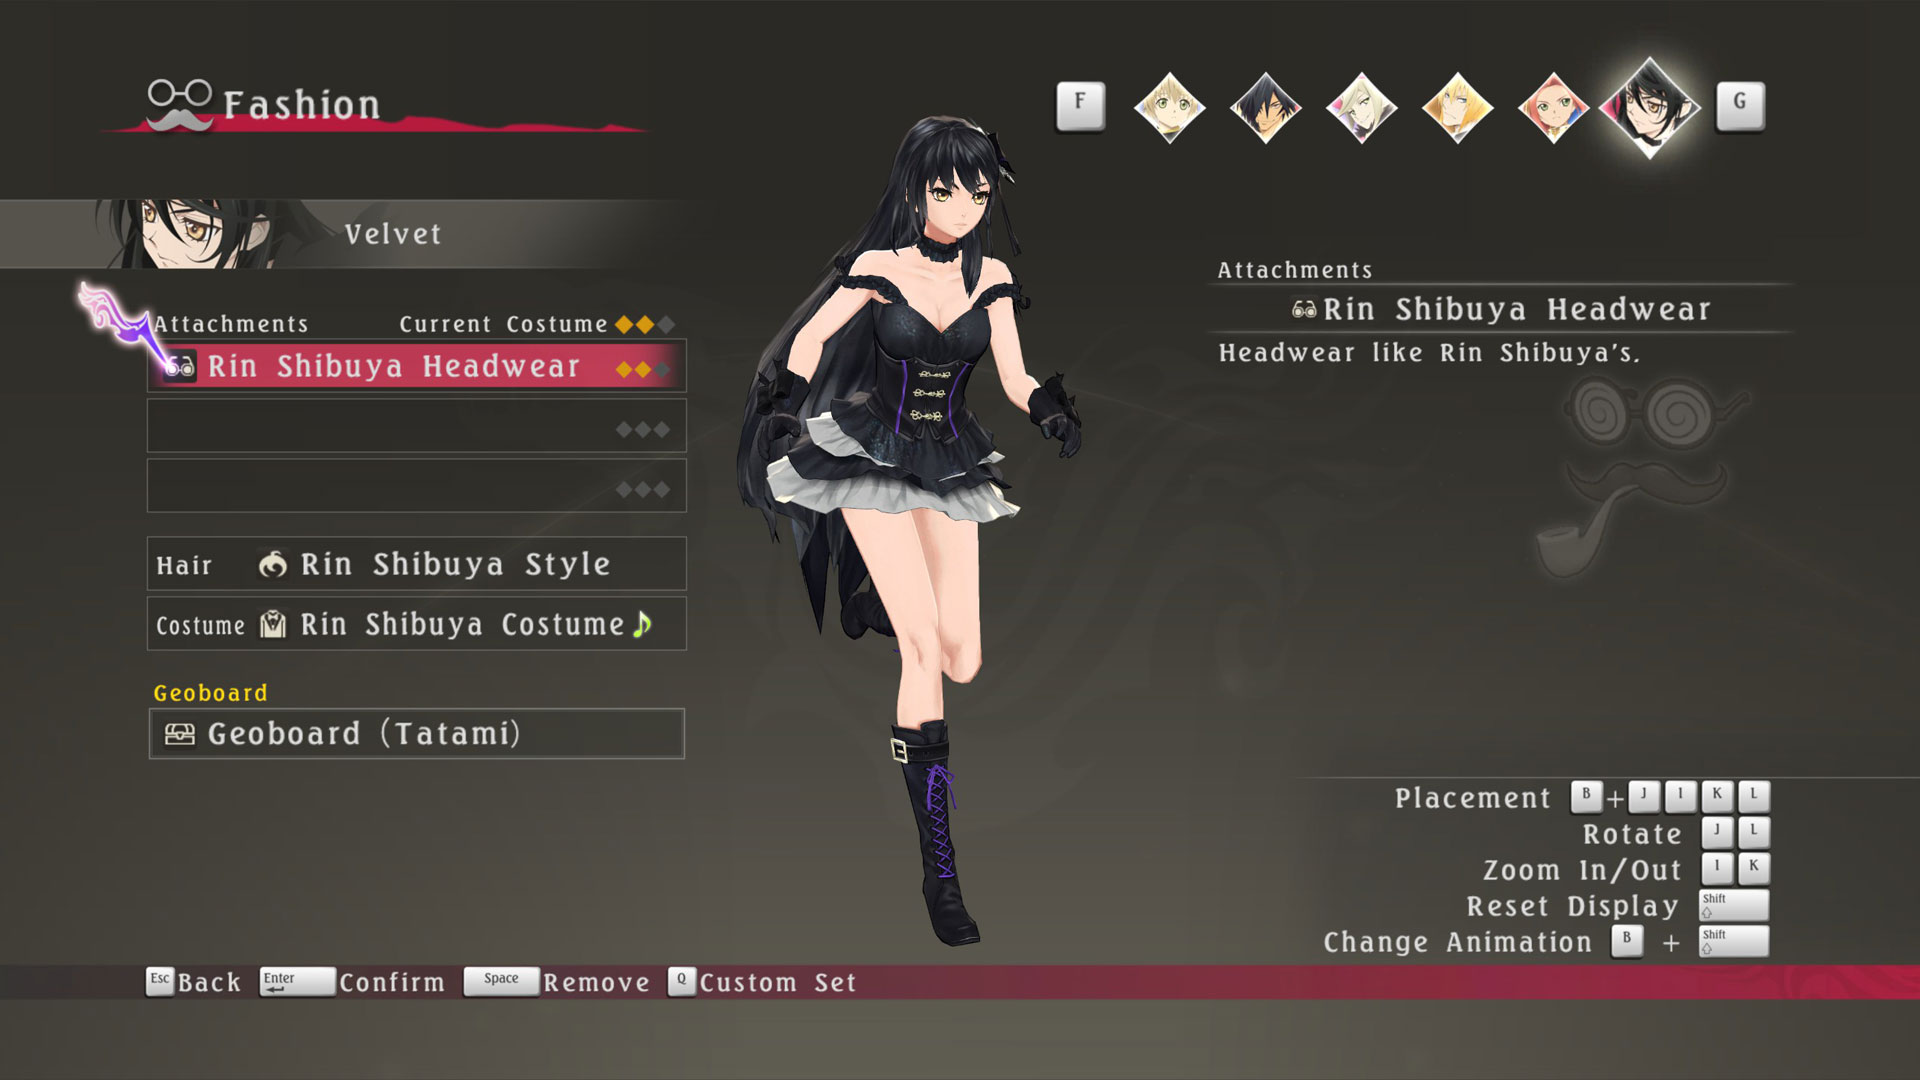 Tales of Berseria™ - Idolm@ster Costumes Set Featured Screenshot #1